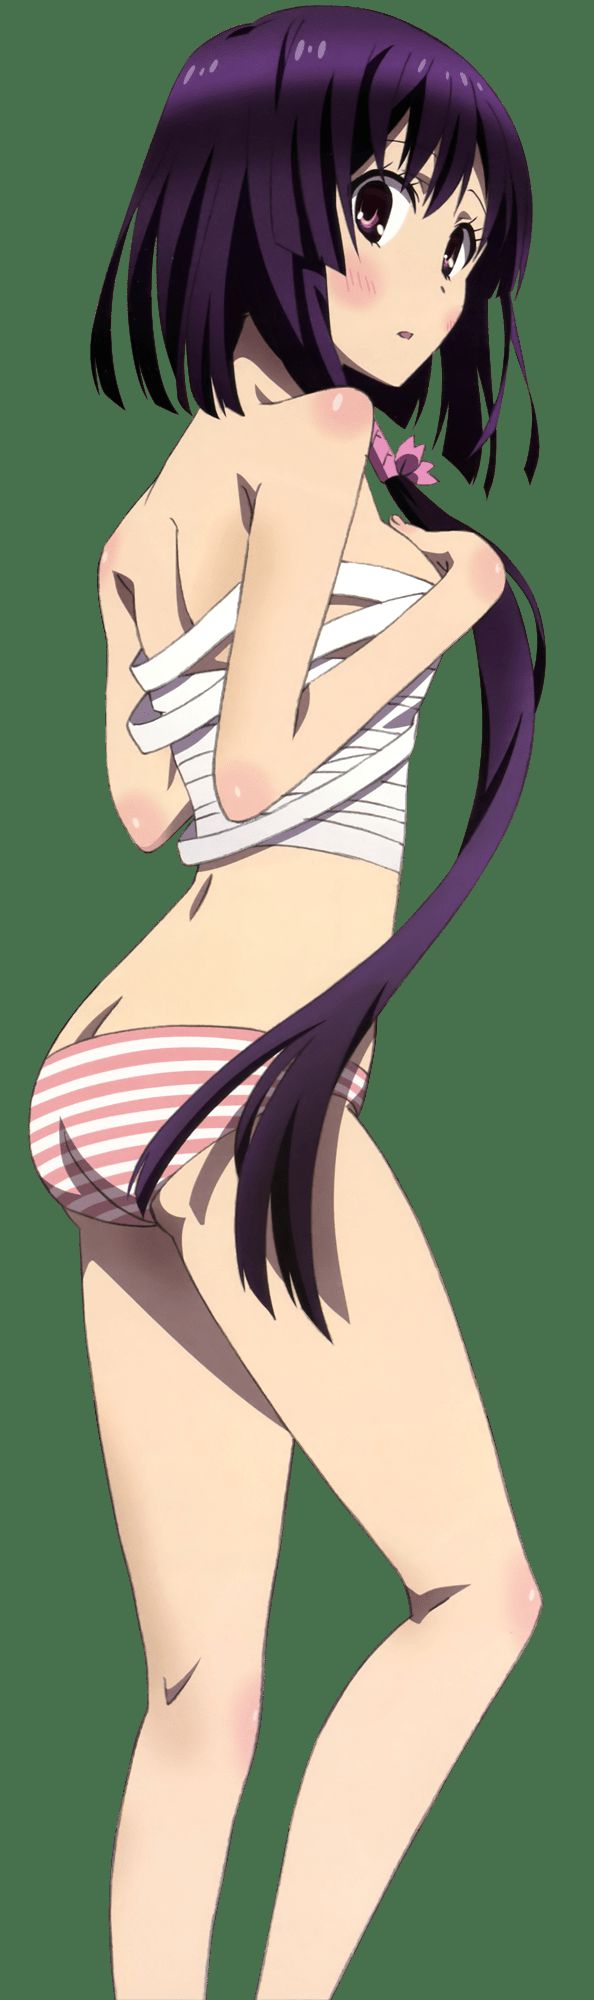 [Anime character material] png background of animated characters erotic images that 161 45